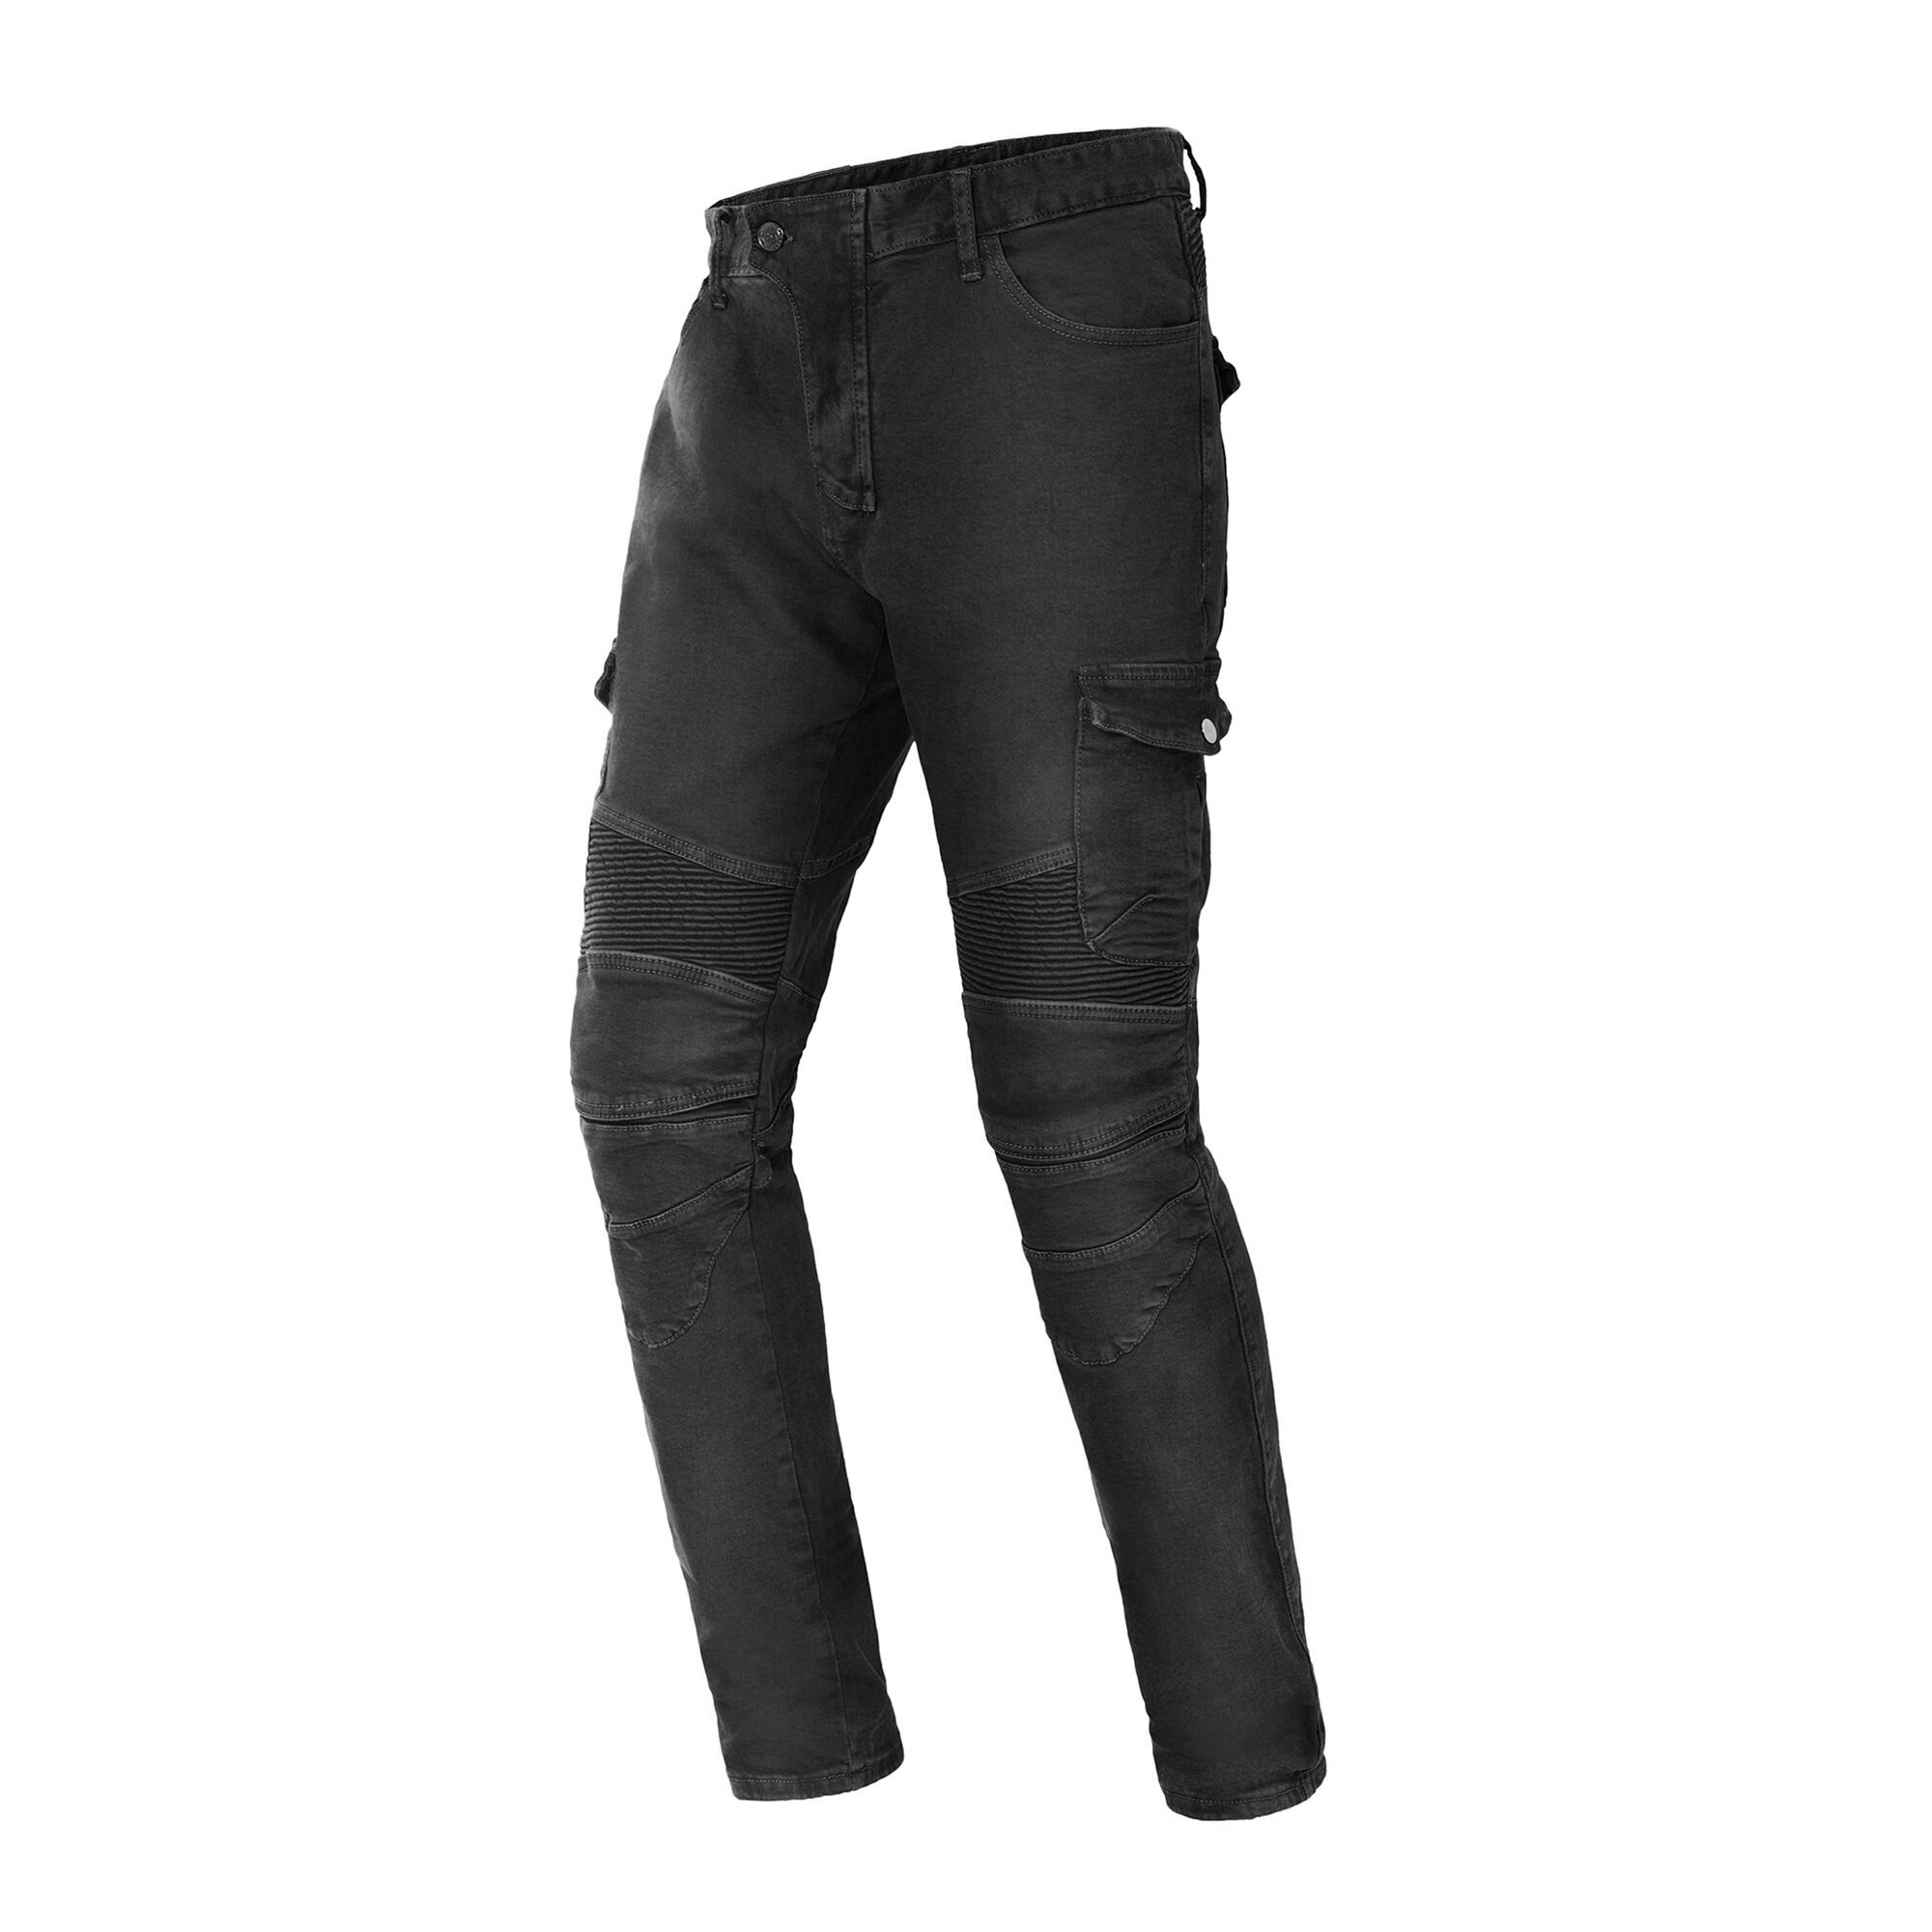 GHOST RACING Motorcycle Pants Men Jeans Protective Gear Riding Trousers With Hip Protection+Knee Pads